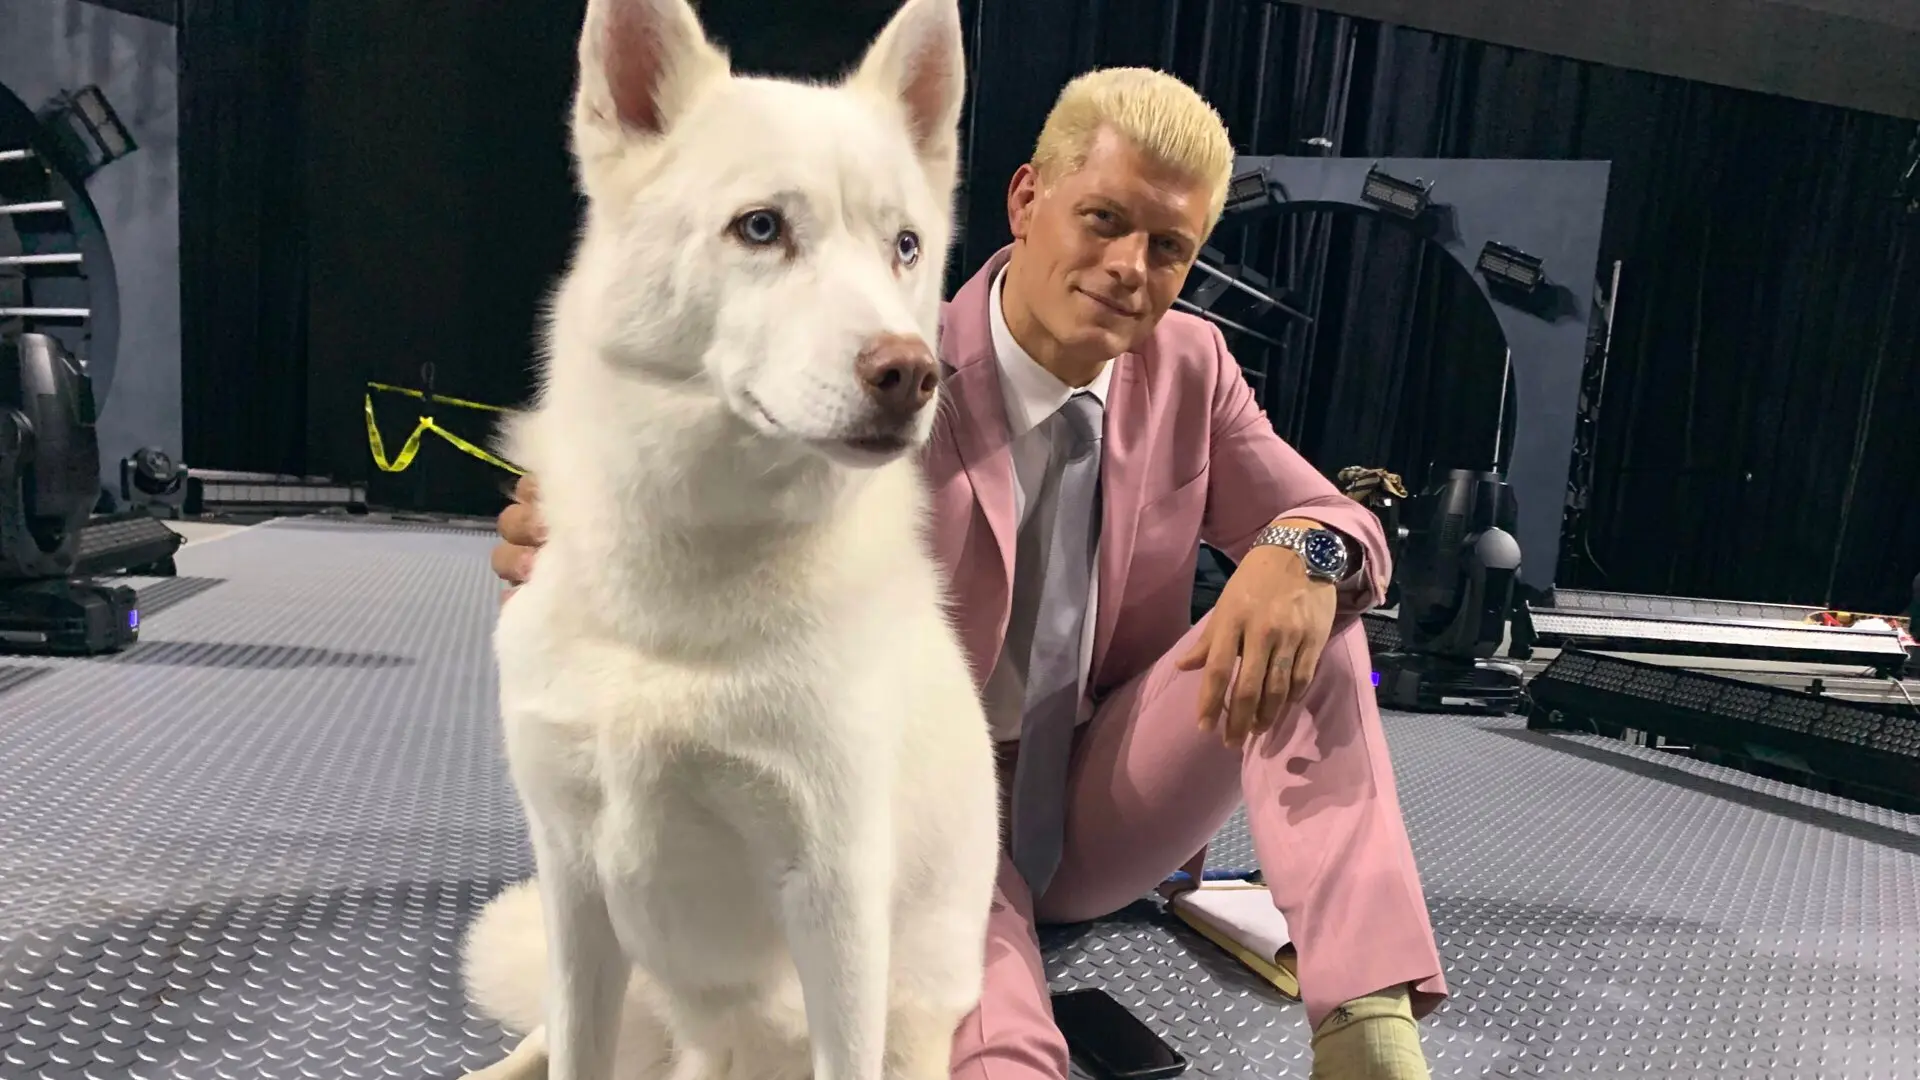 The Rock Criticizes Cody Rhodes’ Dog Pharaoh with Strong Language